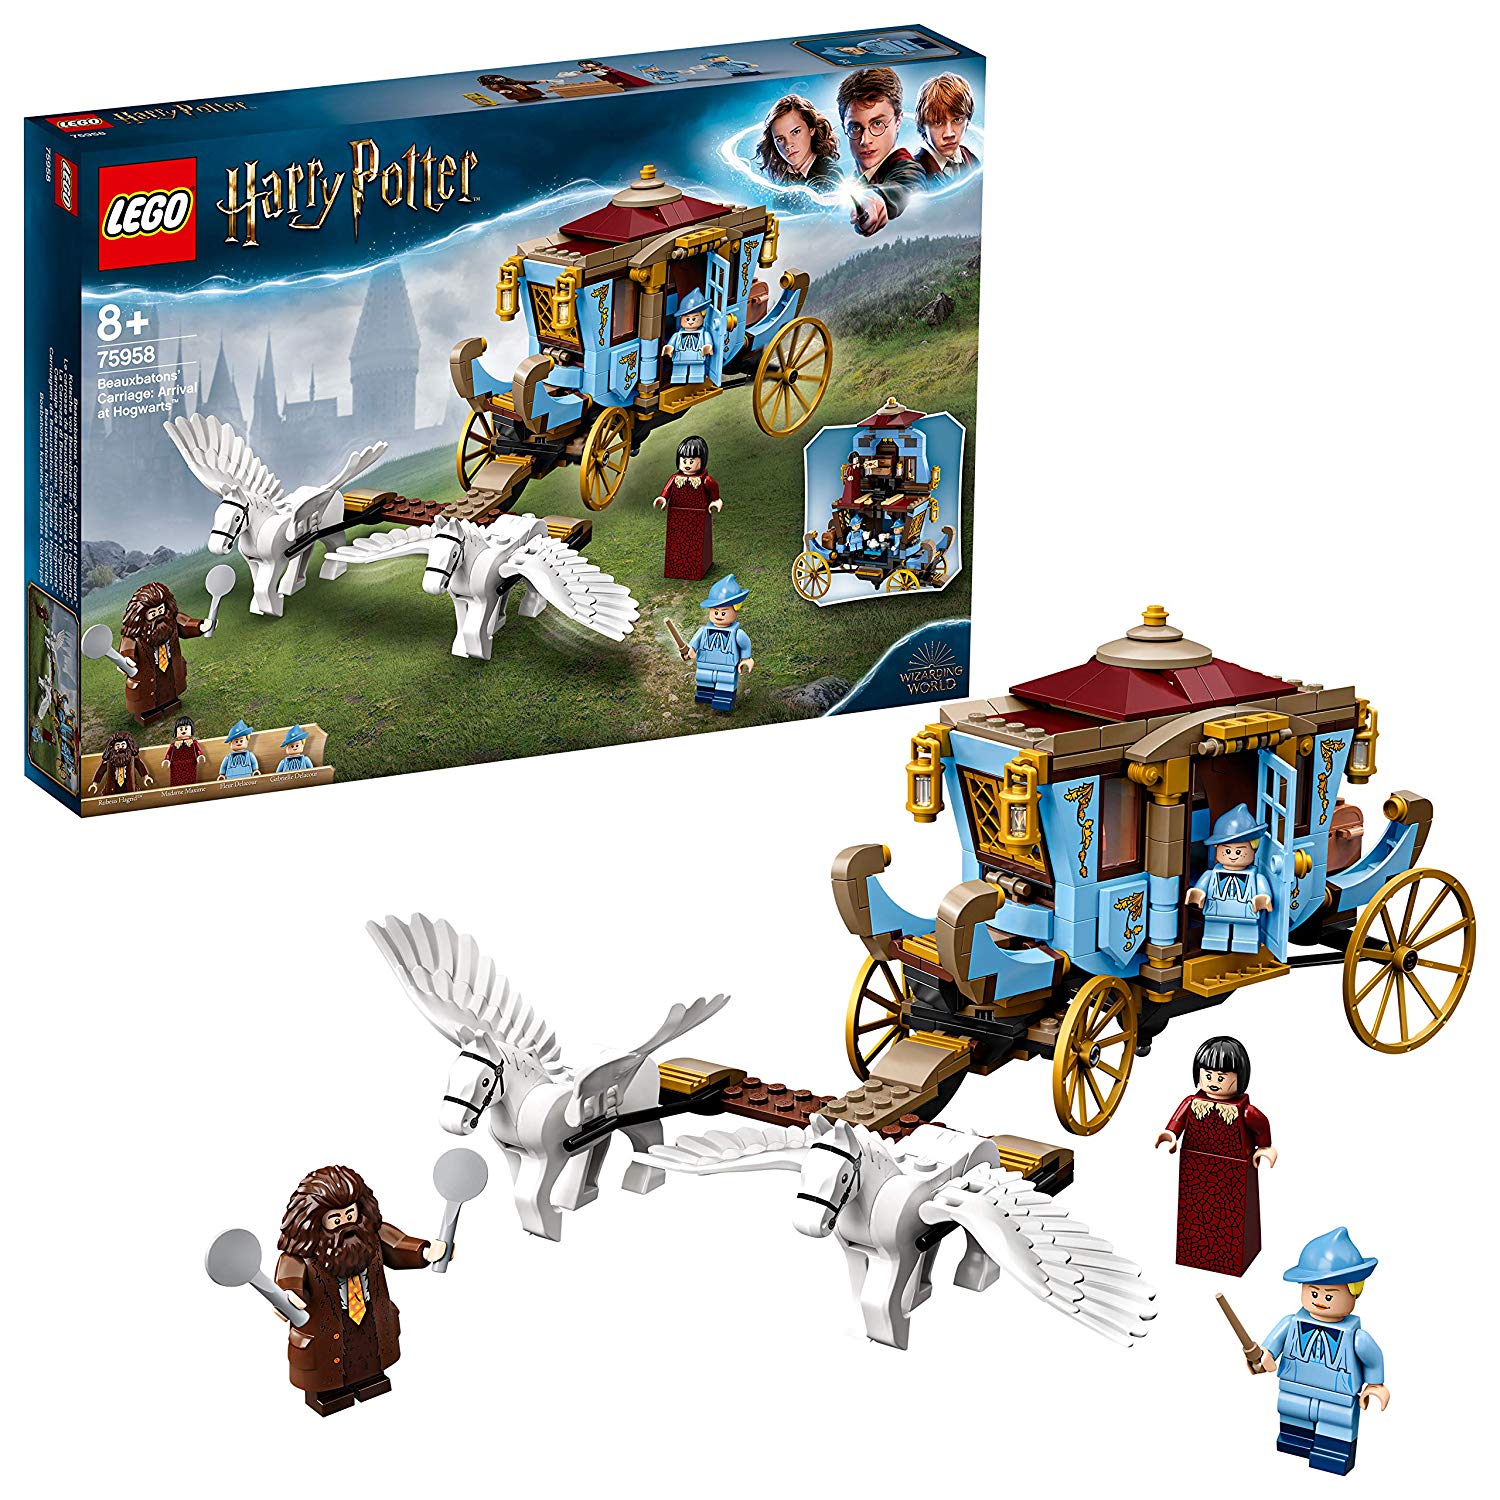 Lego Harry Potter 75958 - Beauxbatons Carriage Arrival In Hogwarts